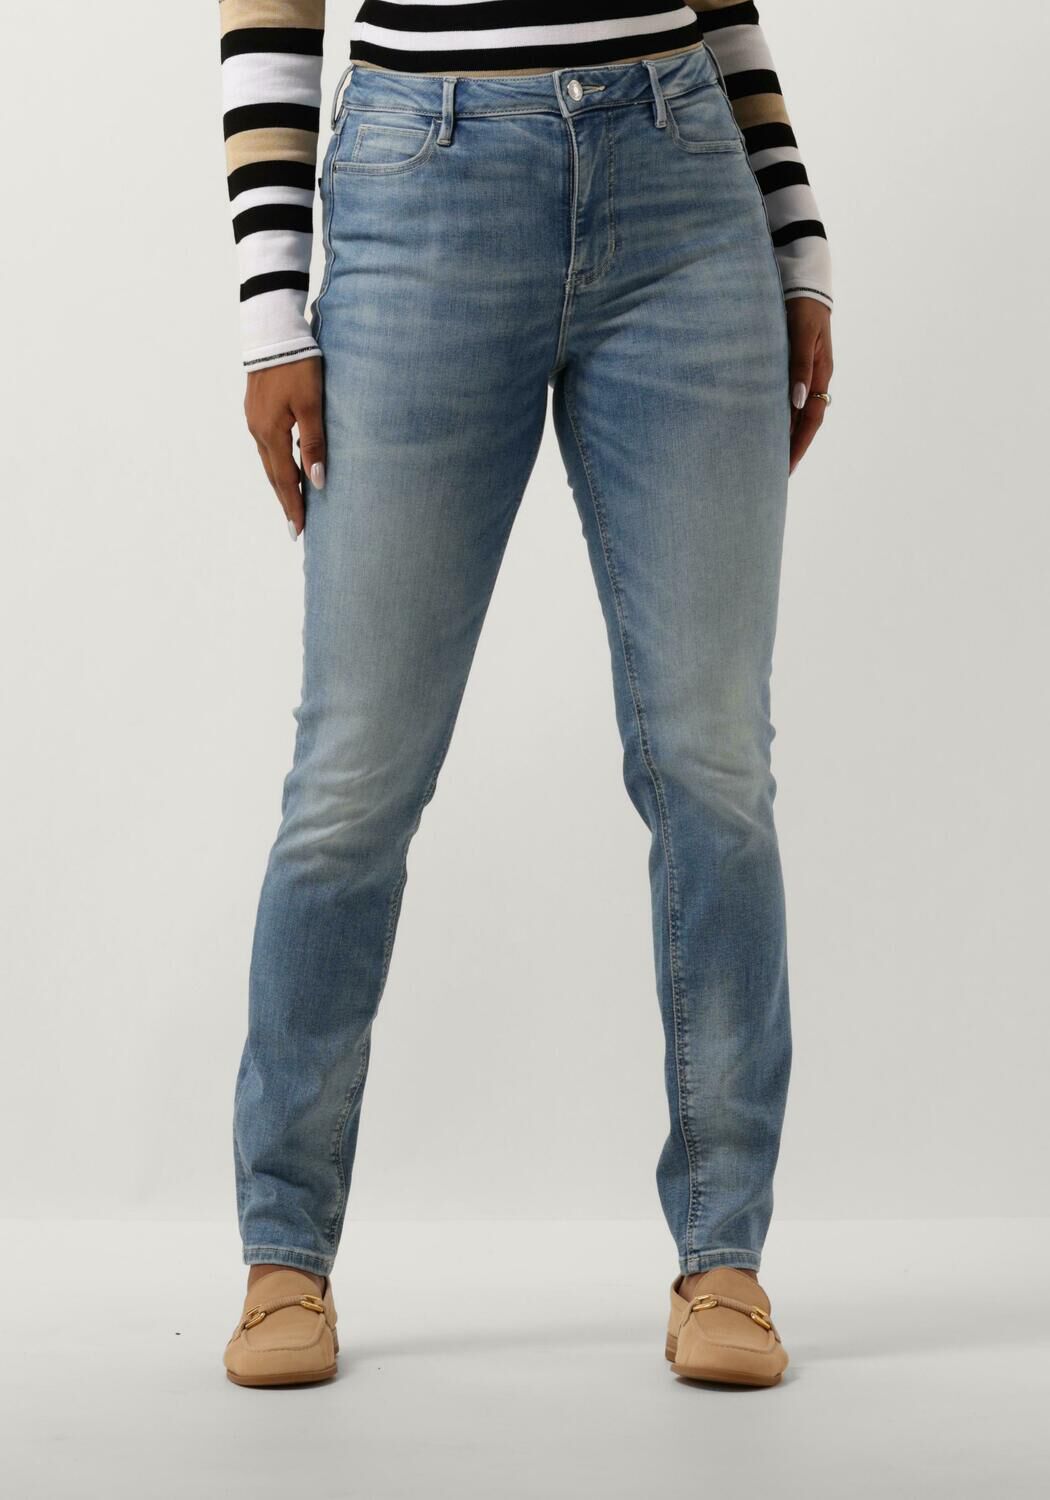 GUESS Dames Jeans 1981 Skinny Blauw